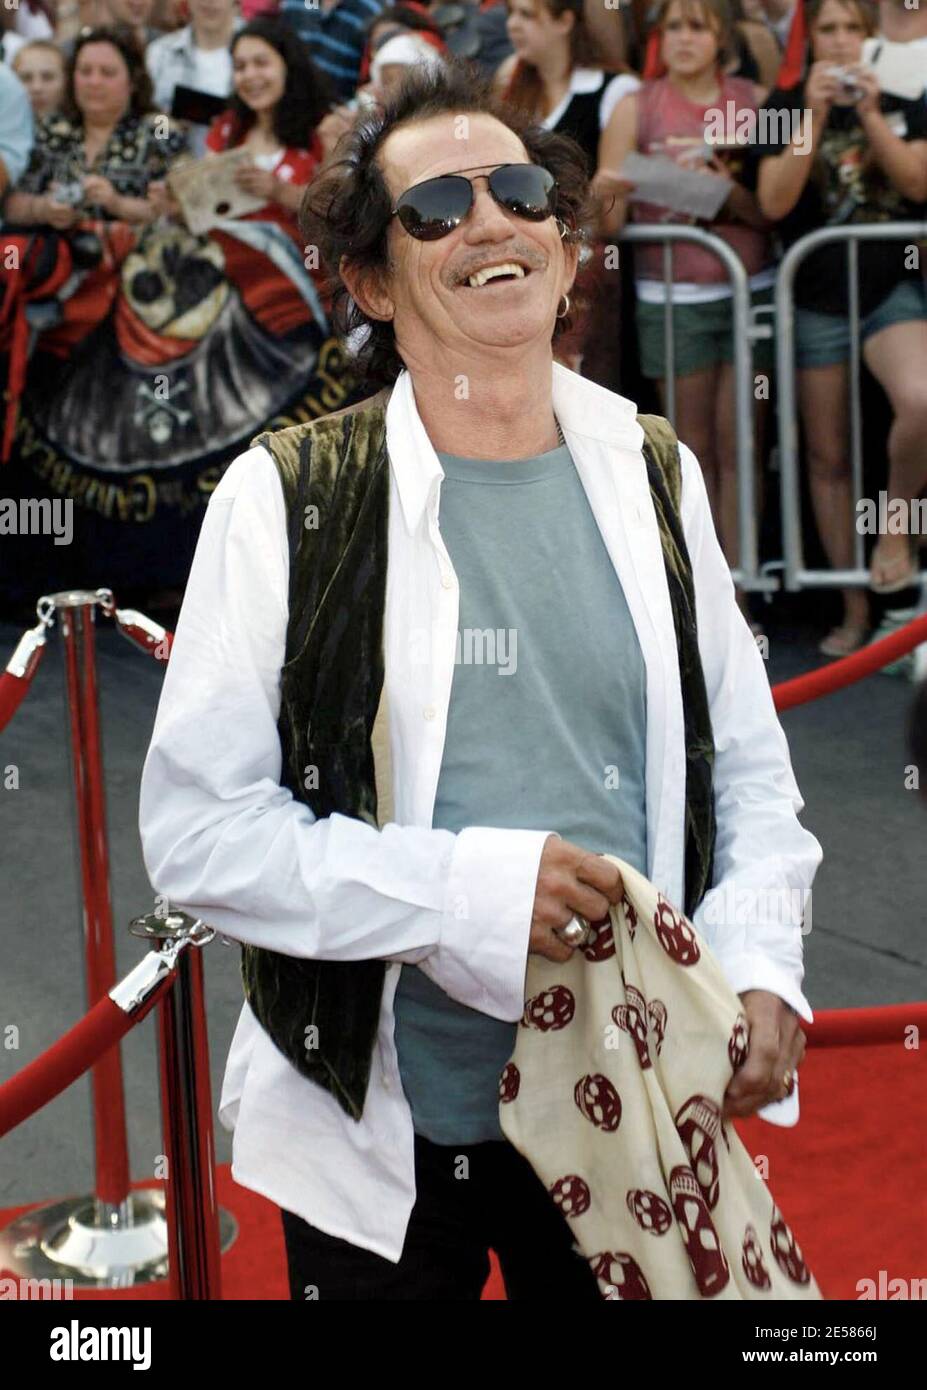 Keith Richards attends the world premiere of Pirates of the Caribbean: At  World's End at Disneyland in Anaheim, Calif. 5/19/07. [[laj]] Stock Photo -  Alamy